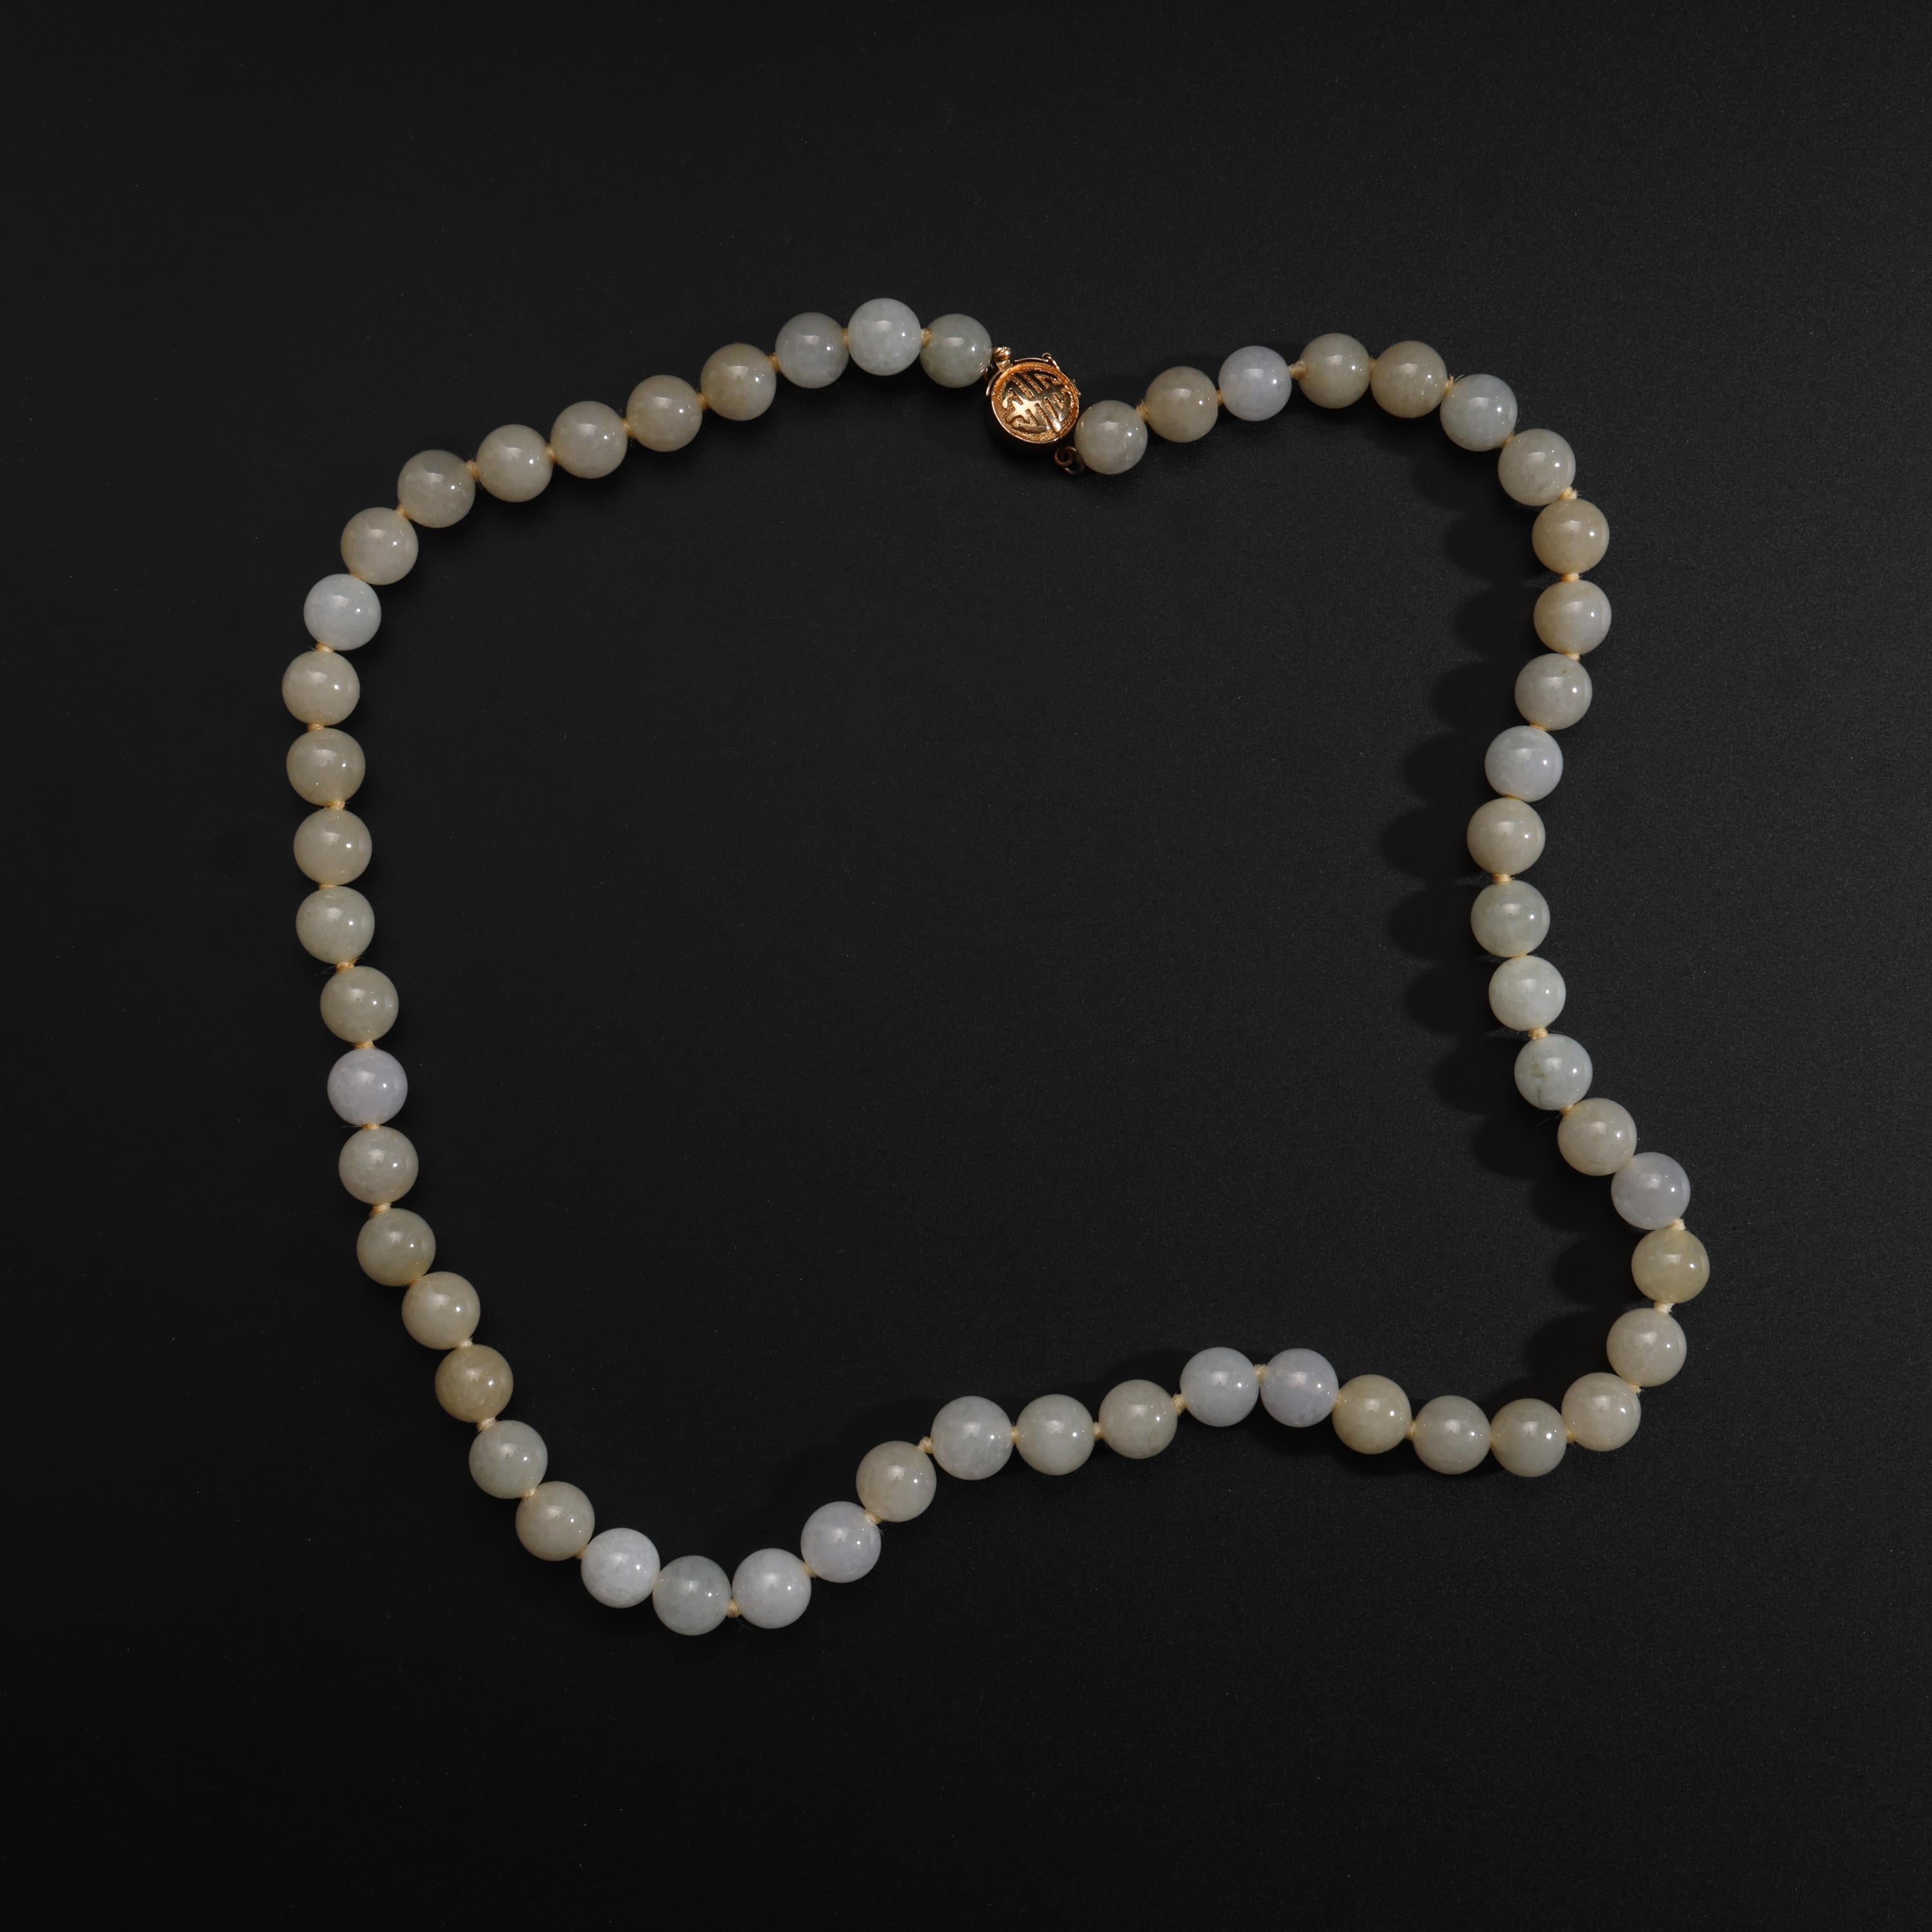 This gorgeous, ethereal Midcentury jadeite jade necklace was created by the iconic San Francisco retailer, Gump's, circa 1970. 

The luminous, translucent fog-toned jade beads measure approximately 8.83mm and are on their original silk string. The